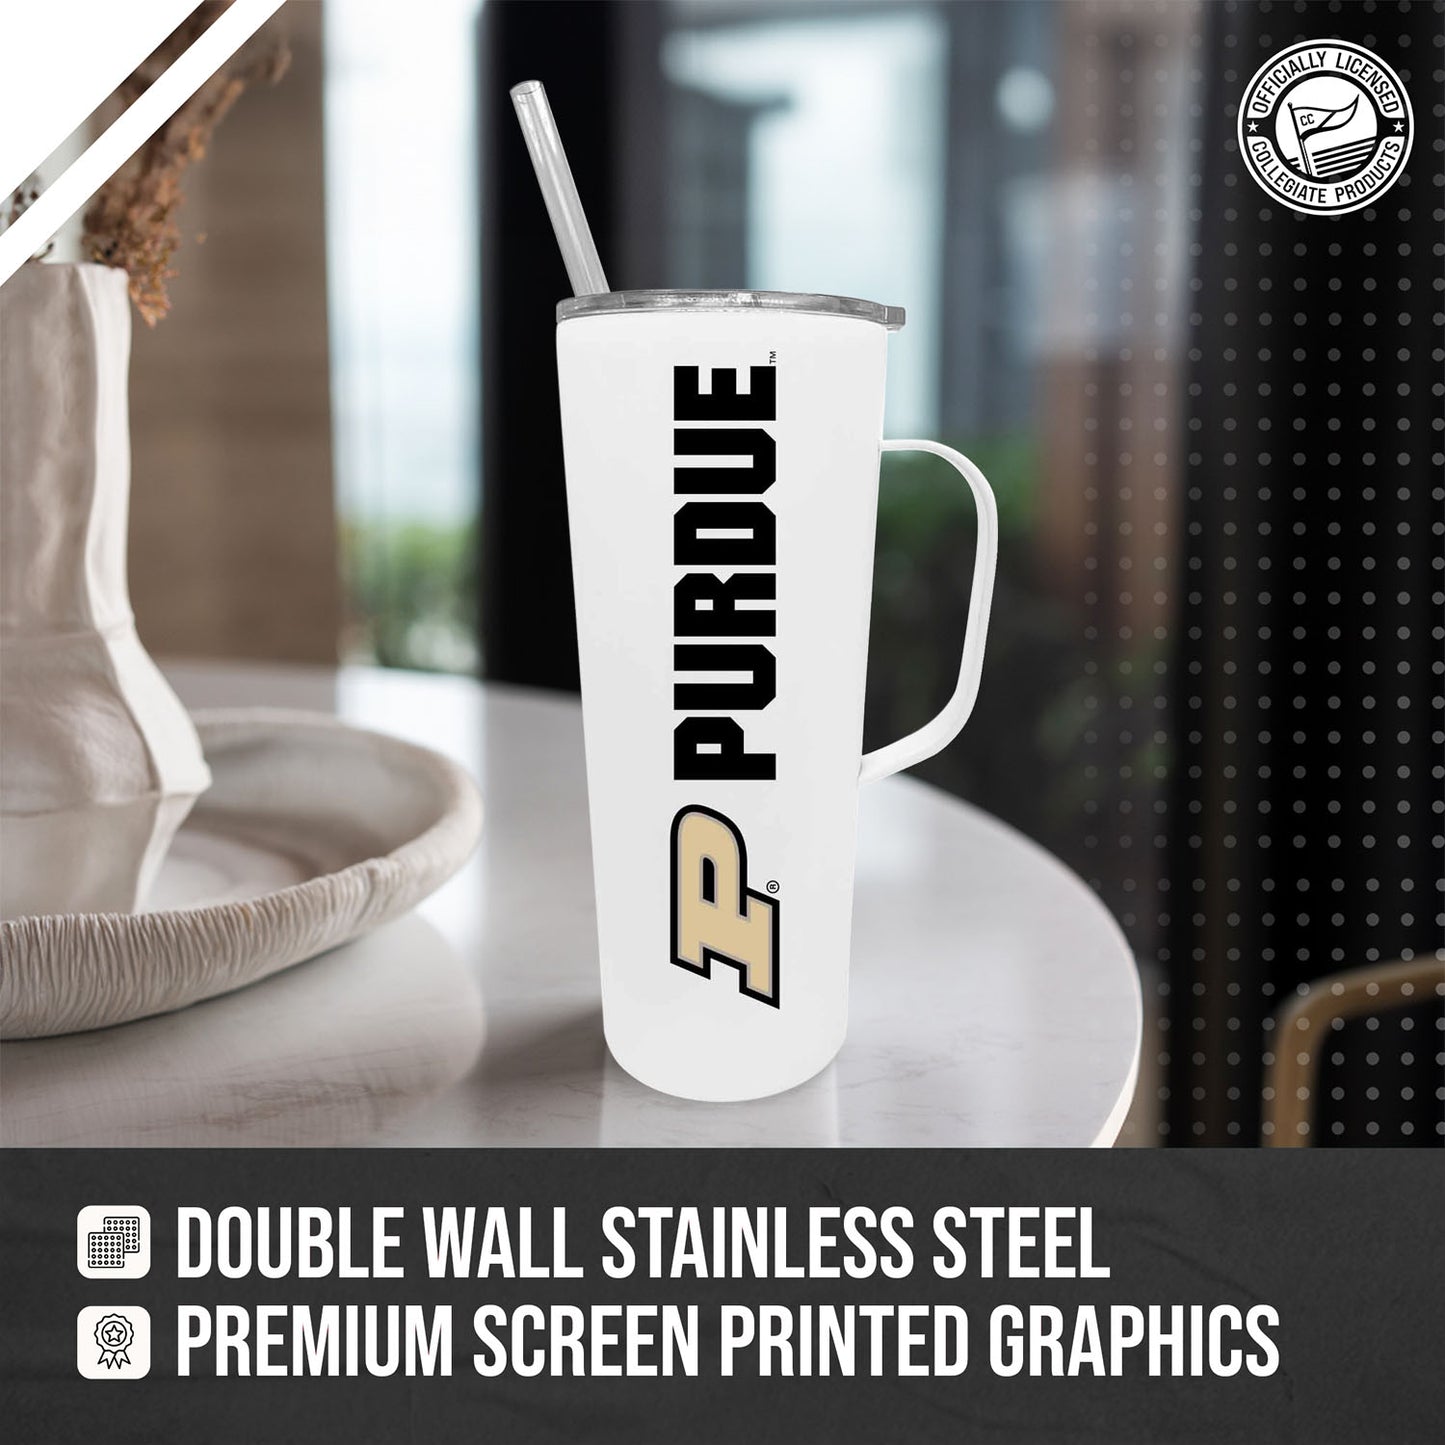 Purdue Boilermakers NCAA Stainless Steal 20oz Roadie With Handle & Dual Option Lid With Straw - White